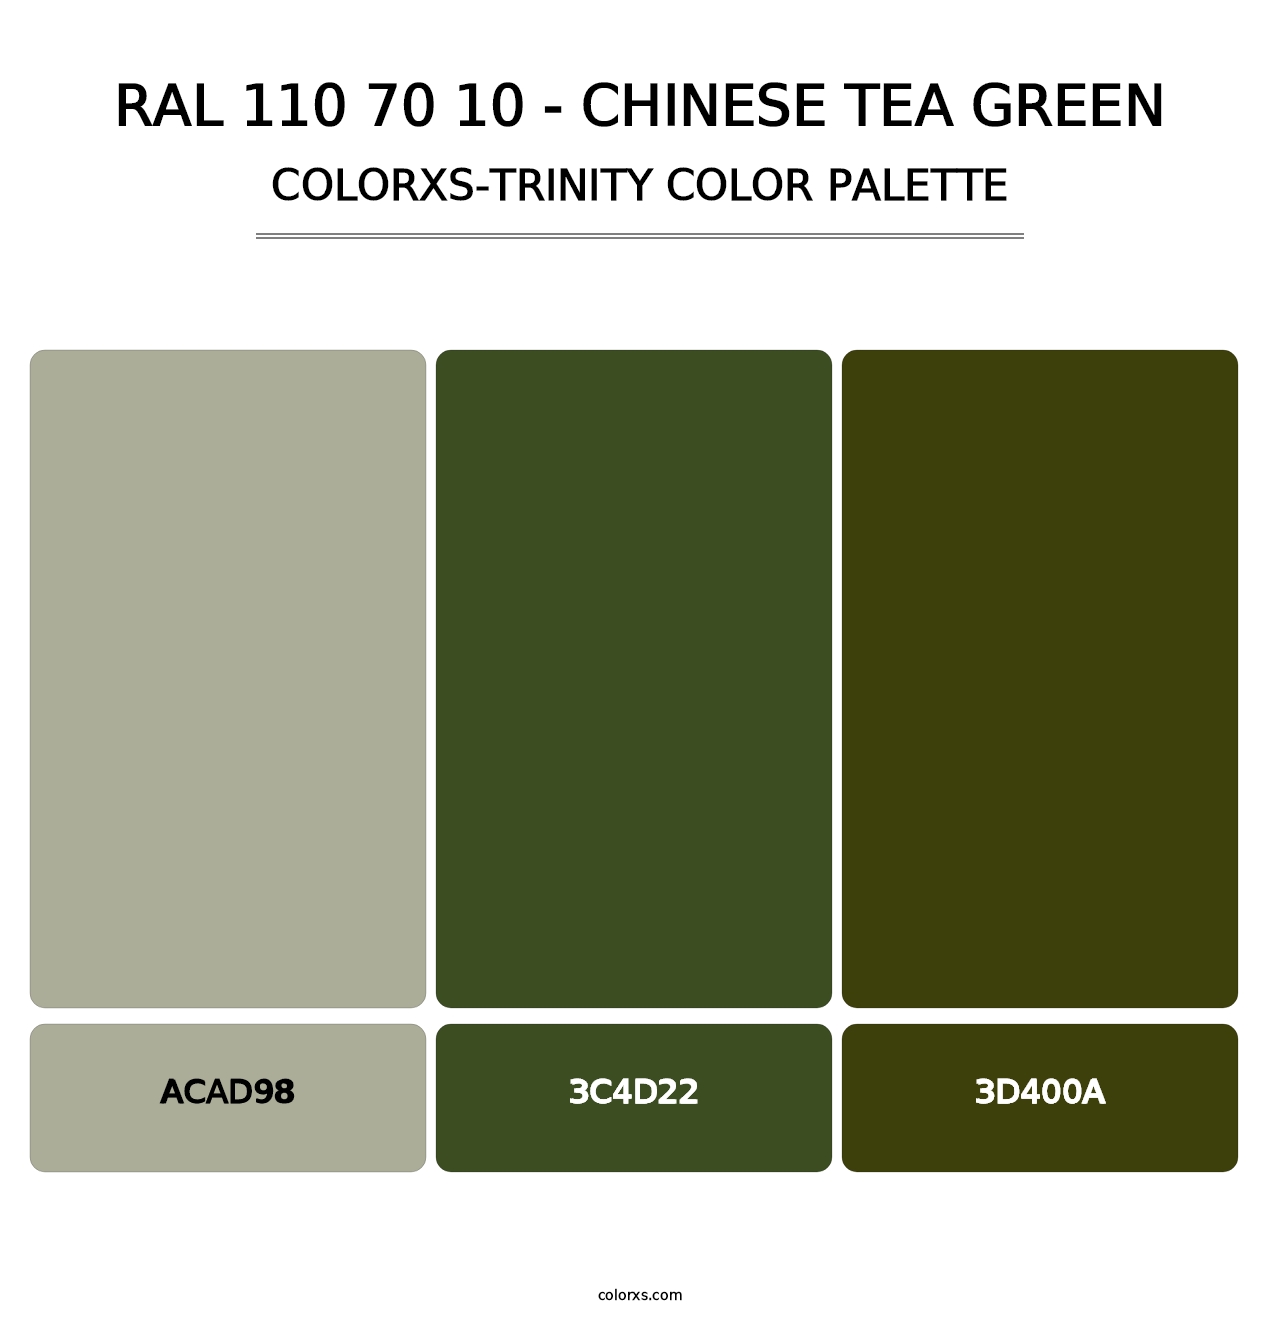 RAL 110 70 10 - Chinese Tea Green - Colorxs Trinity Palette